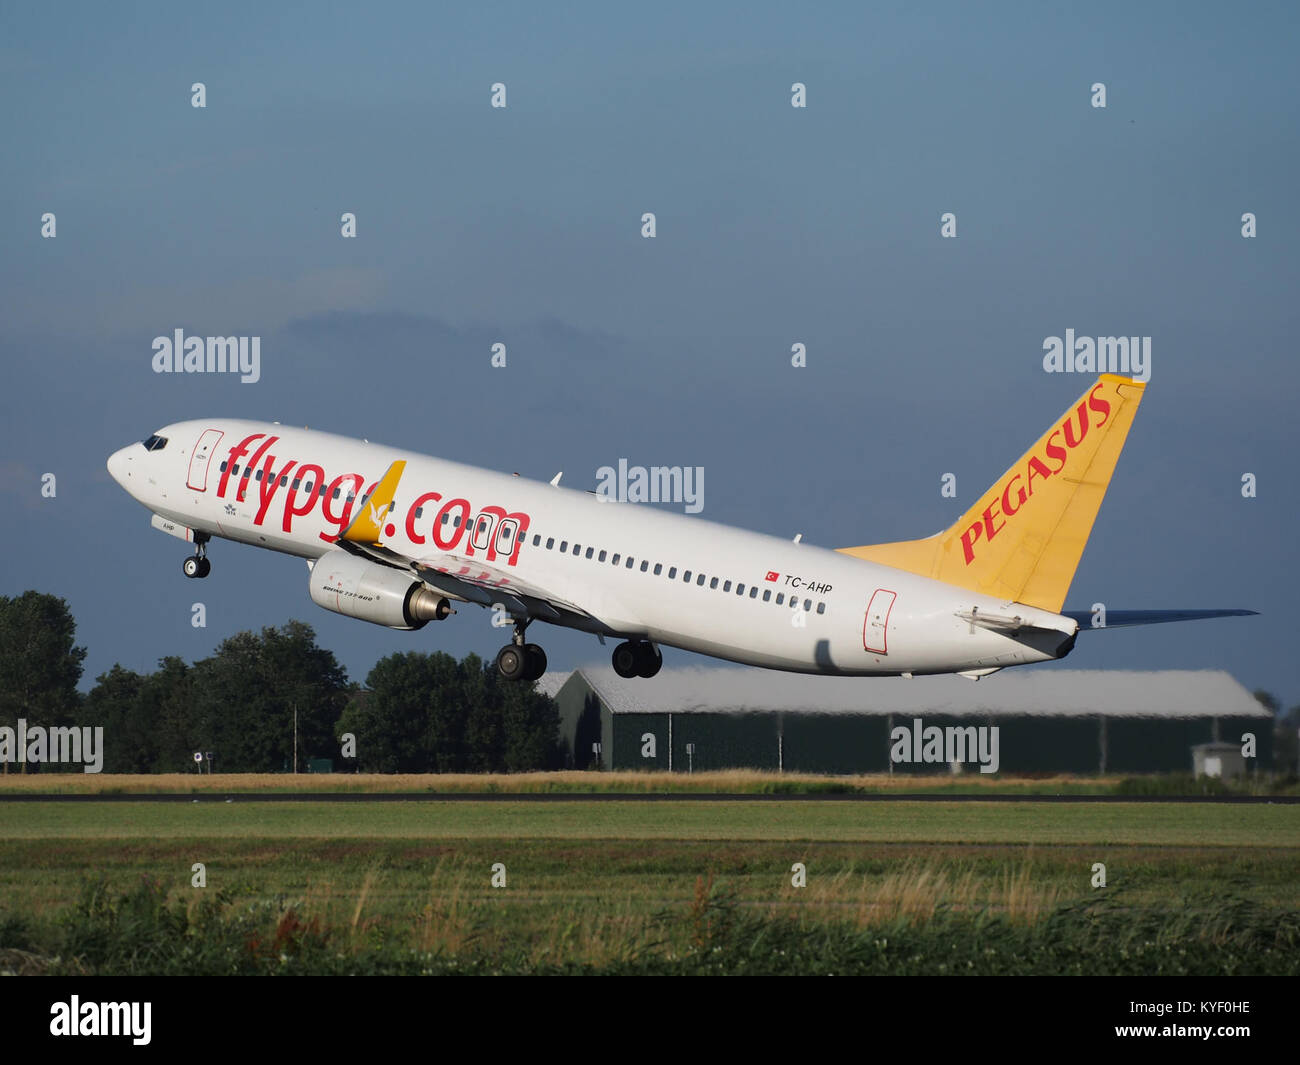 TC-AHP Pegasus Boeing 737-82R(WL) cn40721 takeoff from Schiphol (AMS - EHAM), The Netherlands pic3 Stock Photo